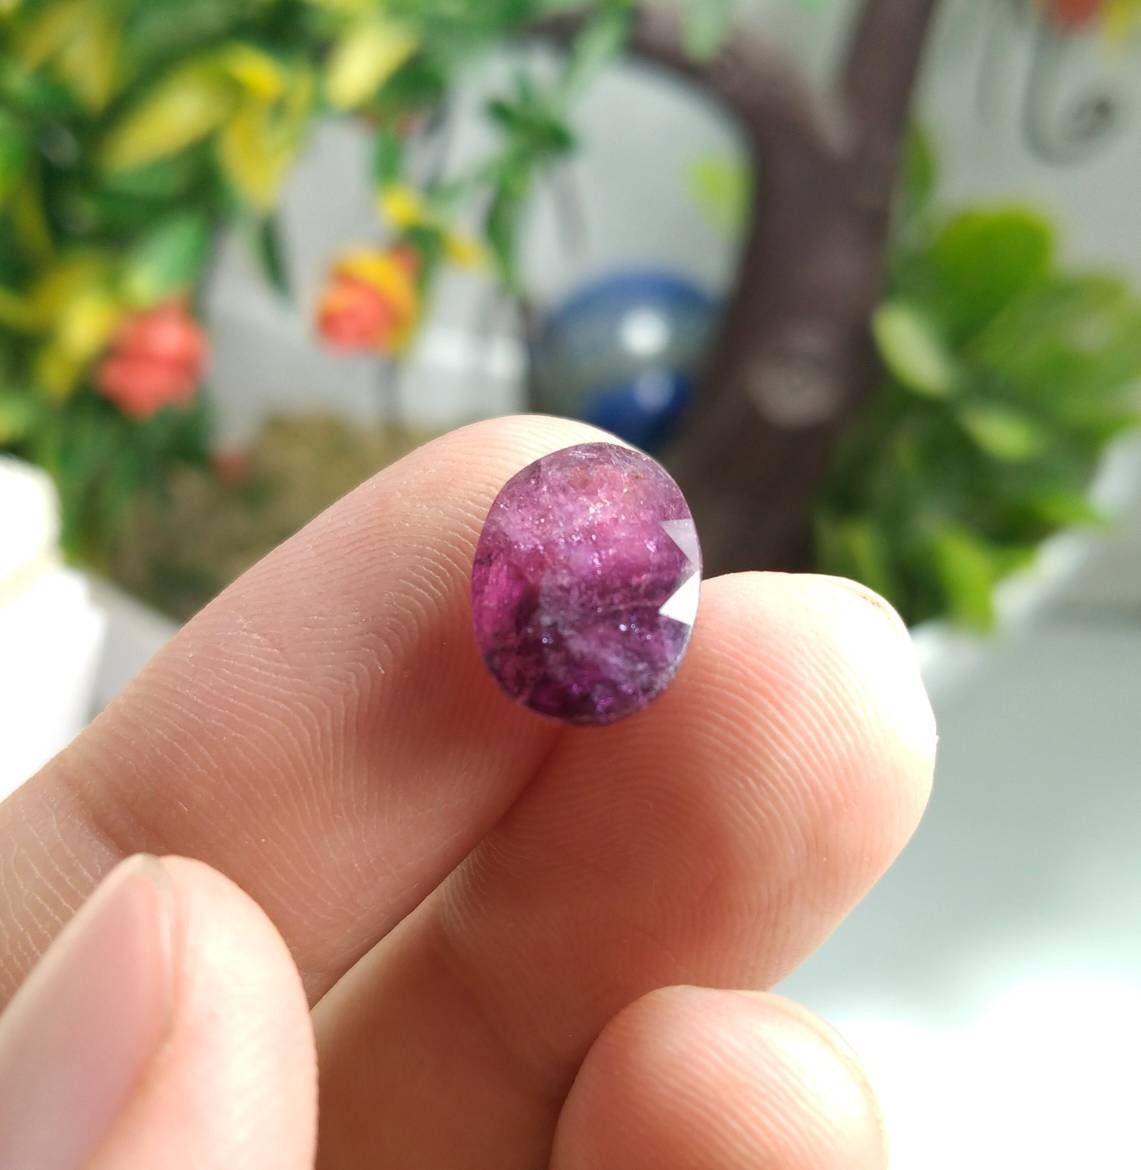 ARSAA GEMS AND MINERALSNatural top quality beautiful 5 carat faceted oval shape pink Tourmaline gem - Premium  from ARSAA GEMS AND MINERALS - Just $20.00! Shop now at ARSAA GEMS AND MINERALS